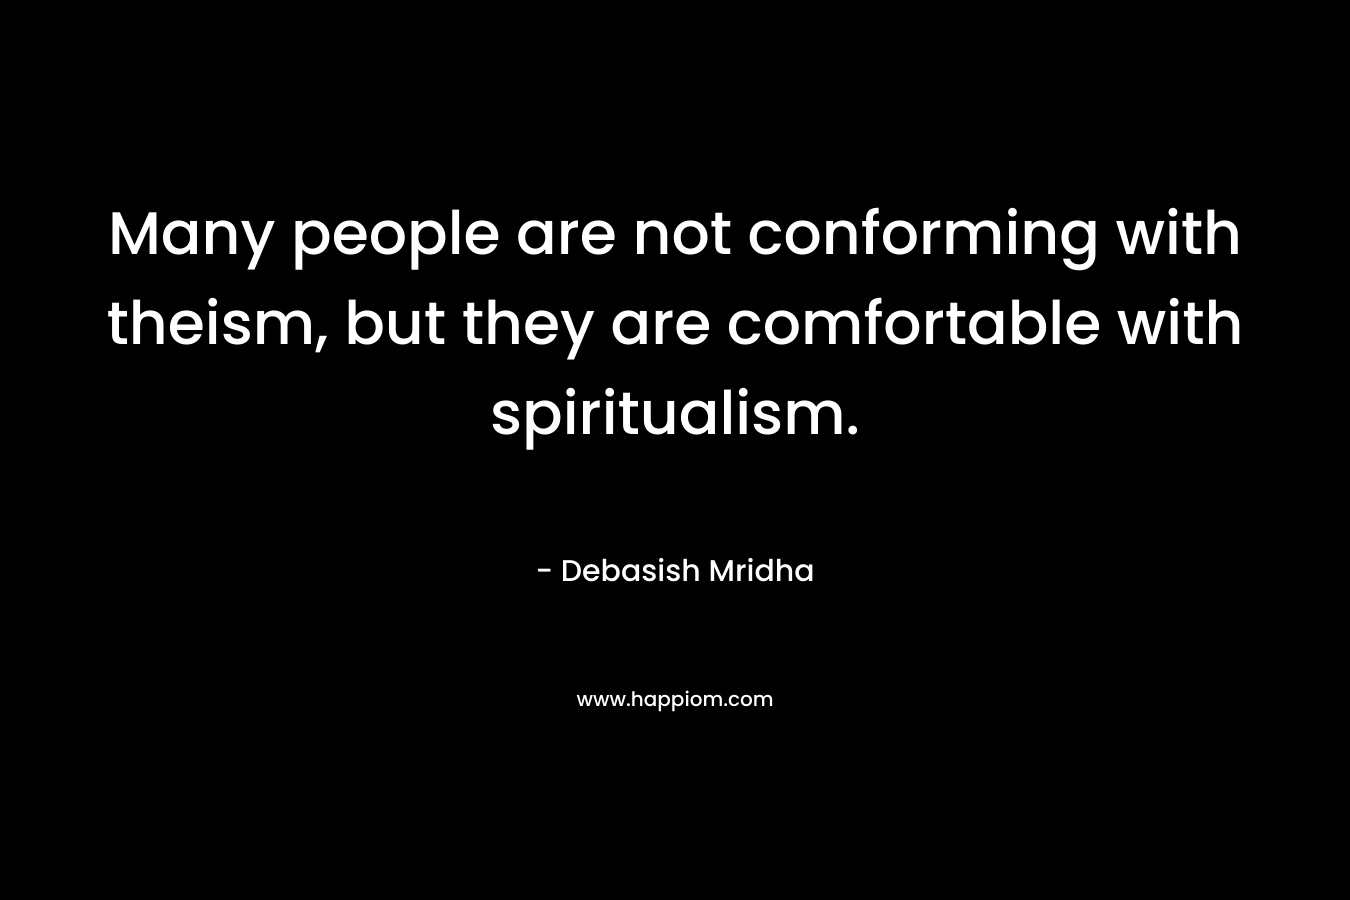 Many people are not conforming with theism, but they are comfortable with spiritualism. – Debasish Mridha